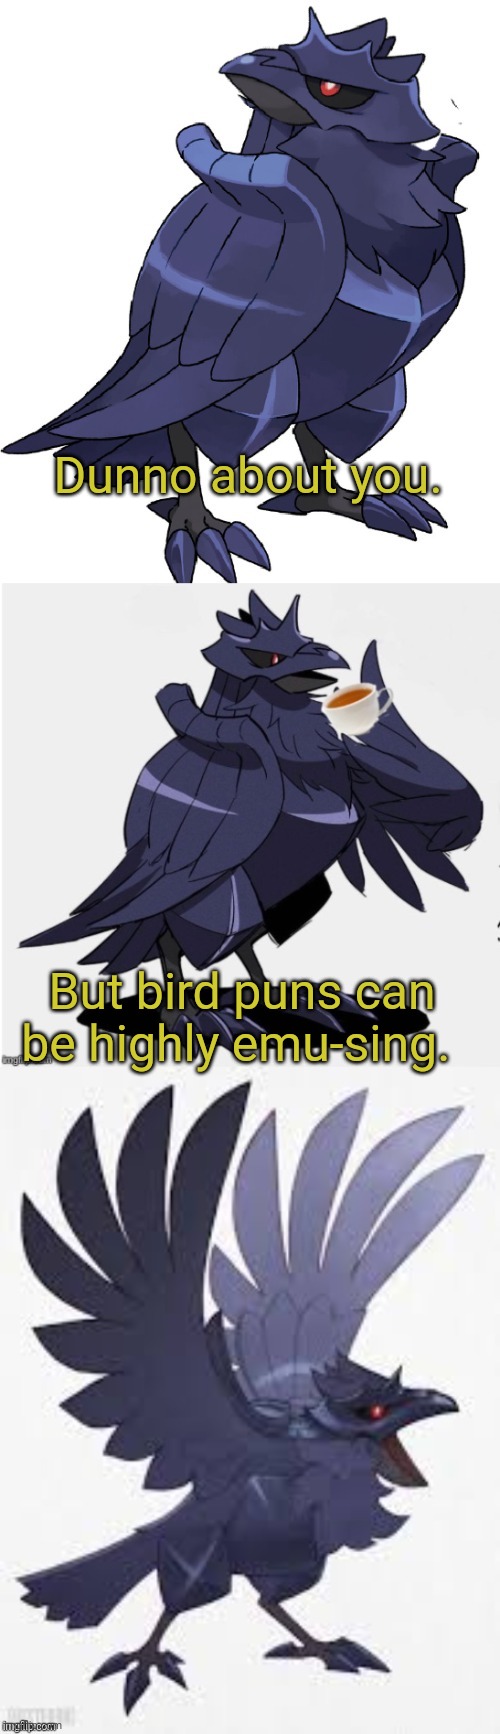 Bad Pun TTDC | Dunno about you. But bird puns can be highly emu-sing. | image tagged in bad pun ttdc | made w/ Imgflip meme maker